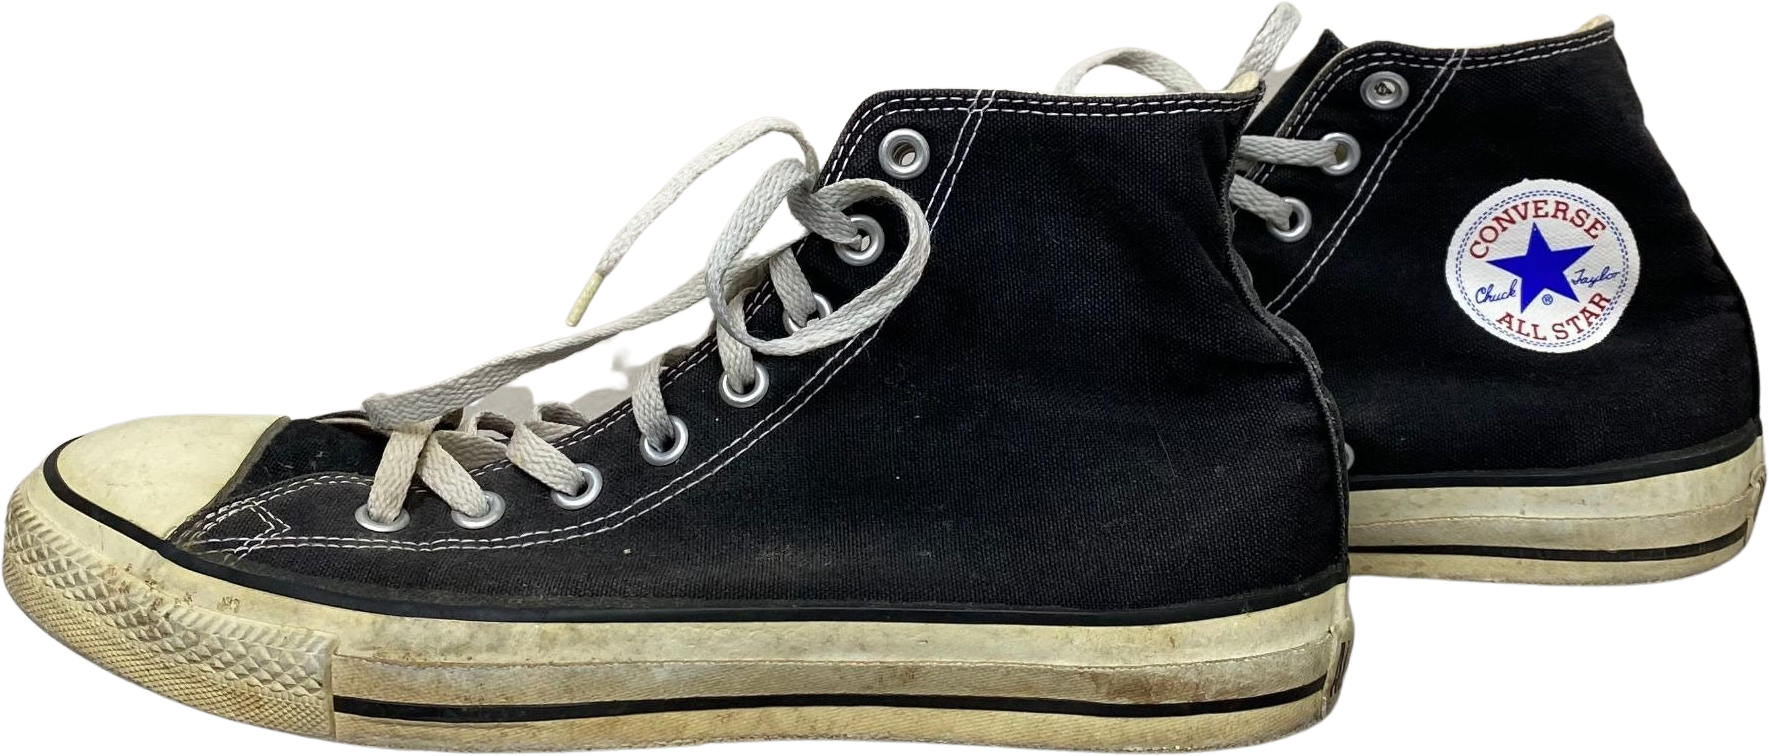 Vintage 90s Converse All Stars Made In Usa Chuck Taylor Black High